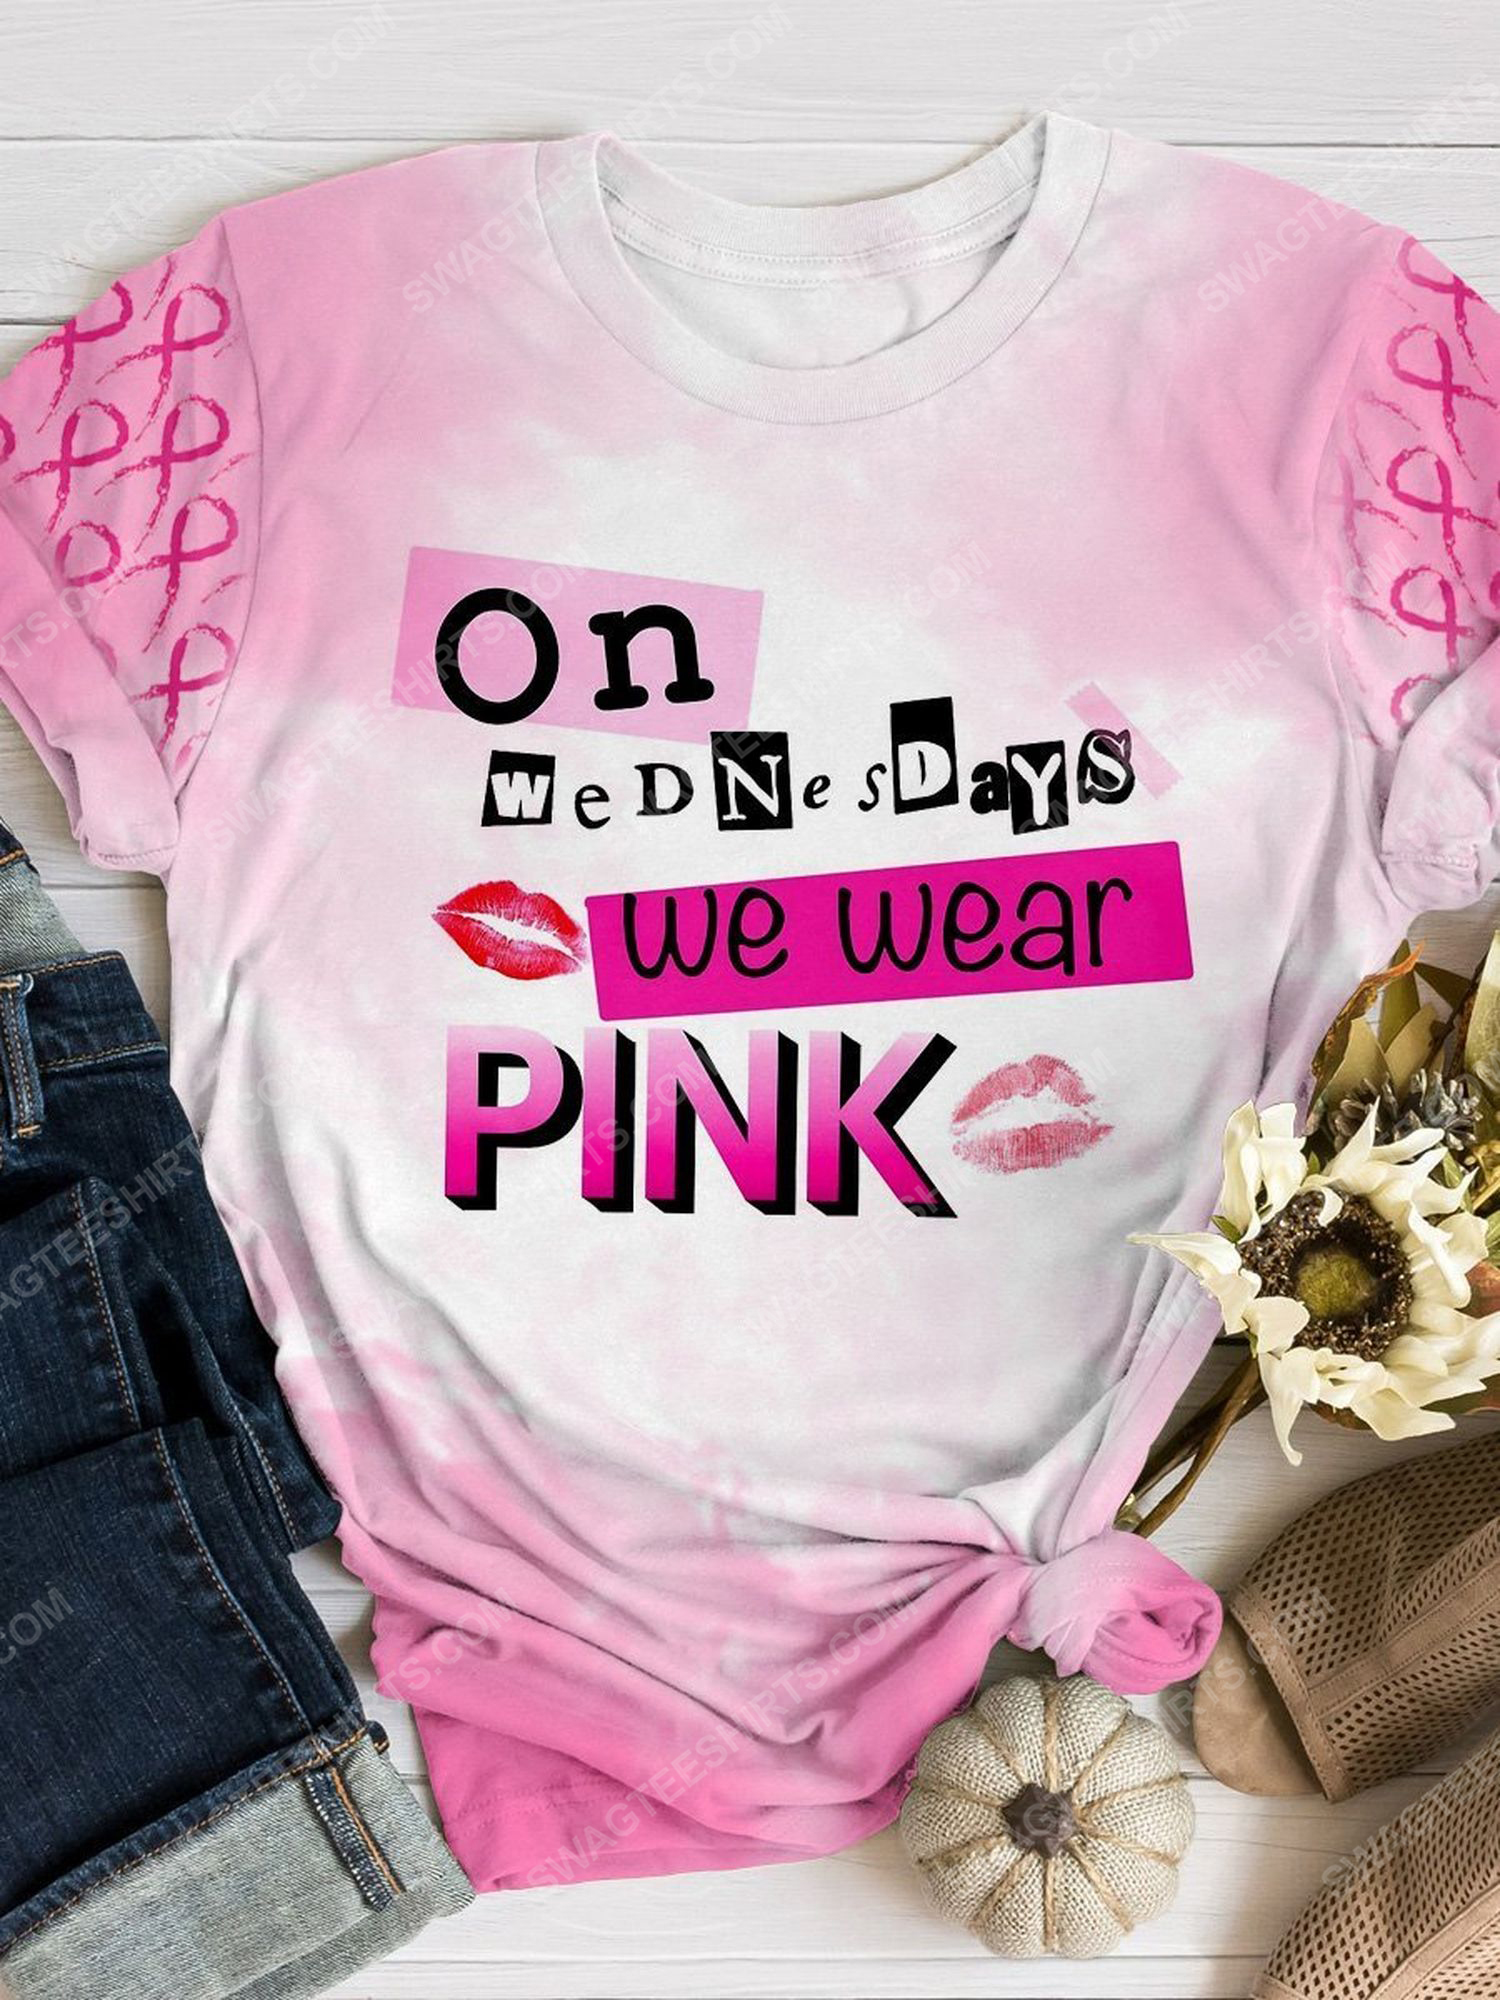 Breast cancer awareness on wednesdays we wear pink shirt 1 - Copy (2)